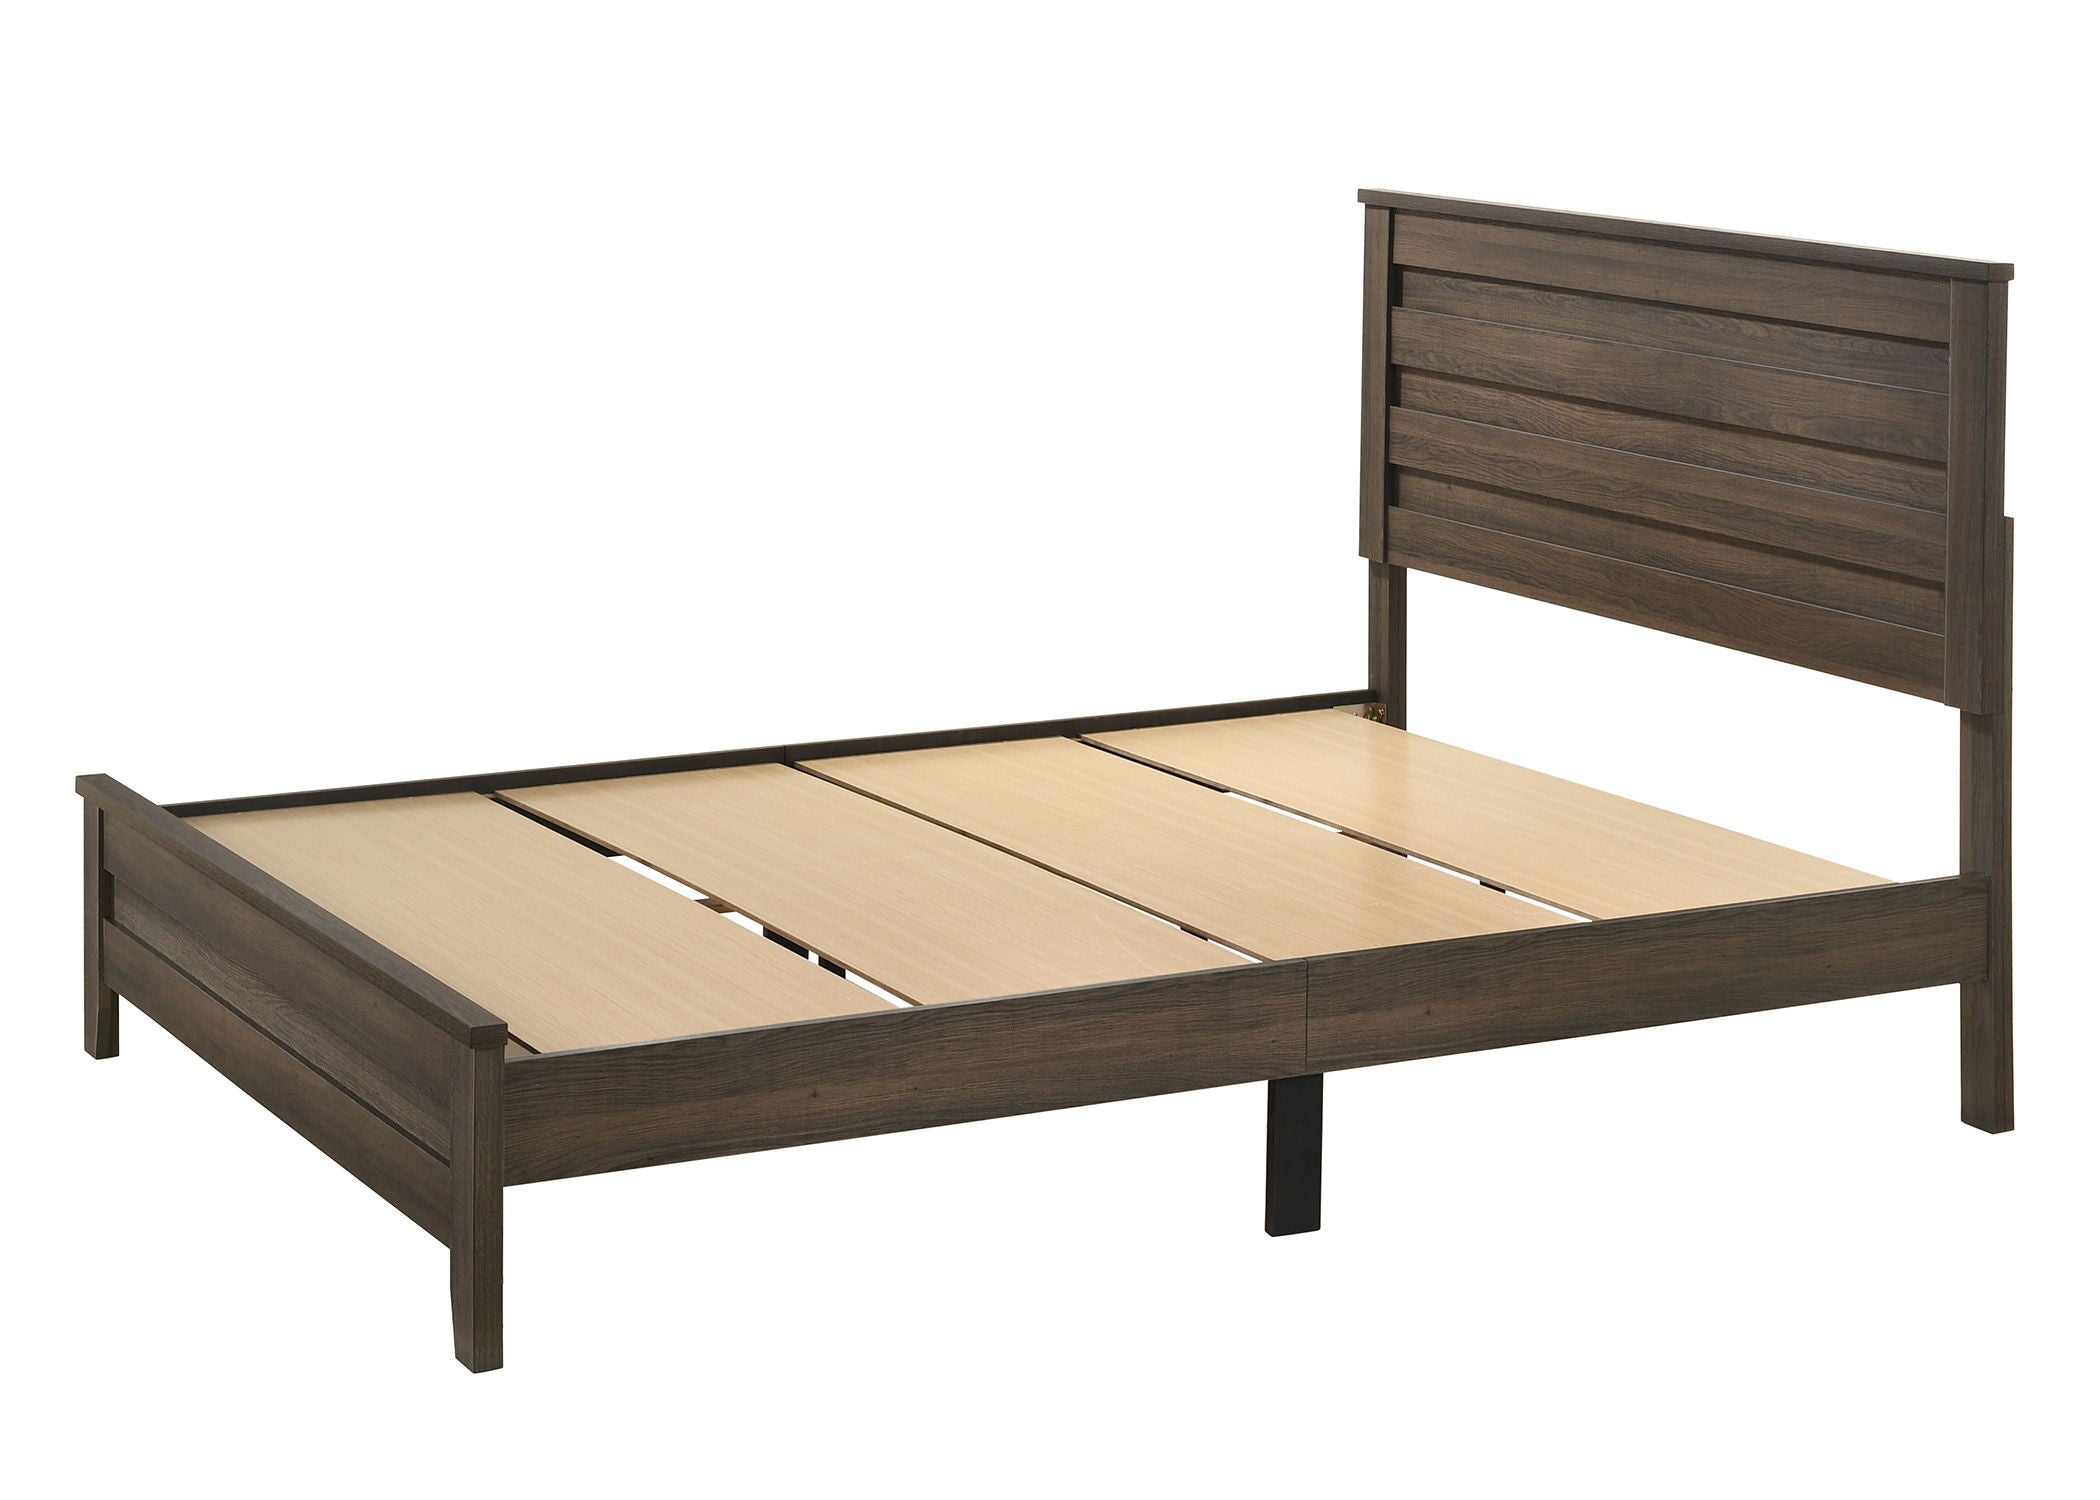 Marley - Panel Bed In One Box